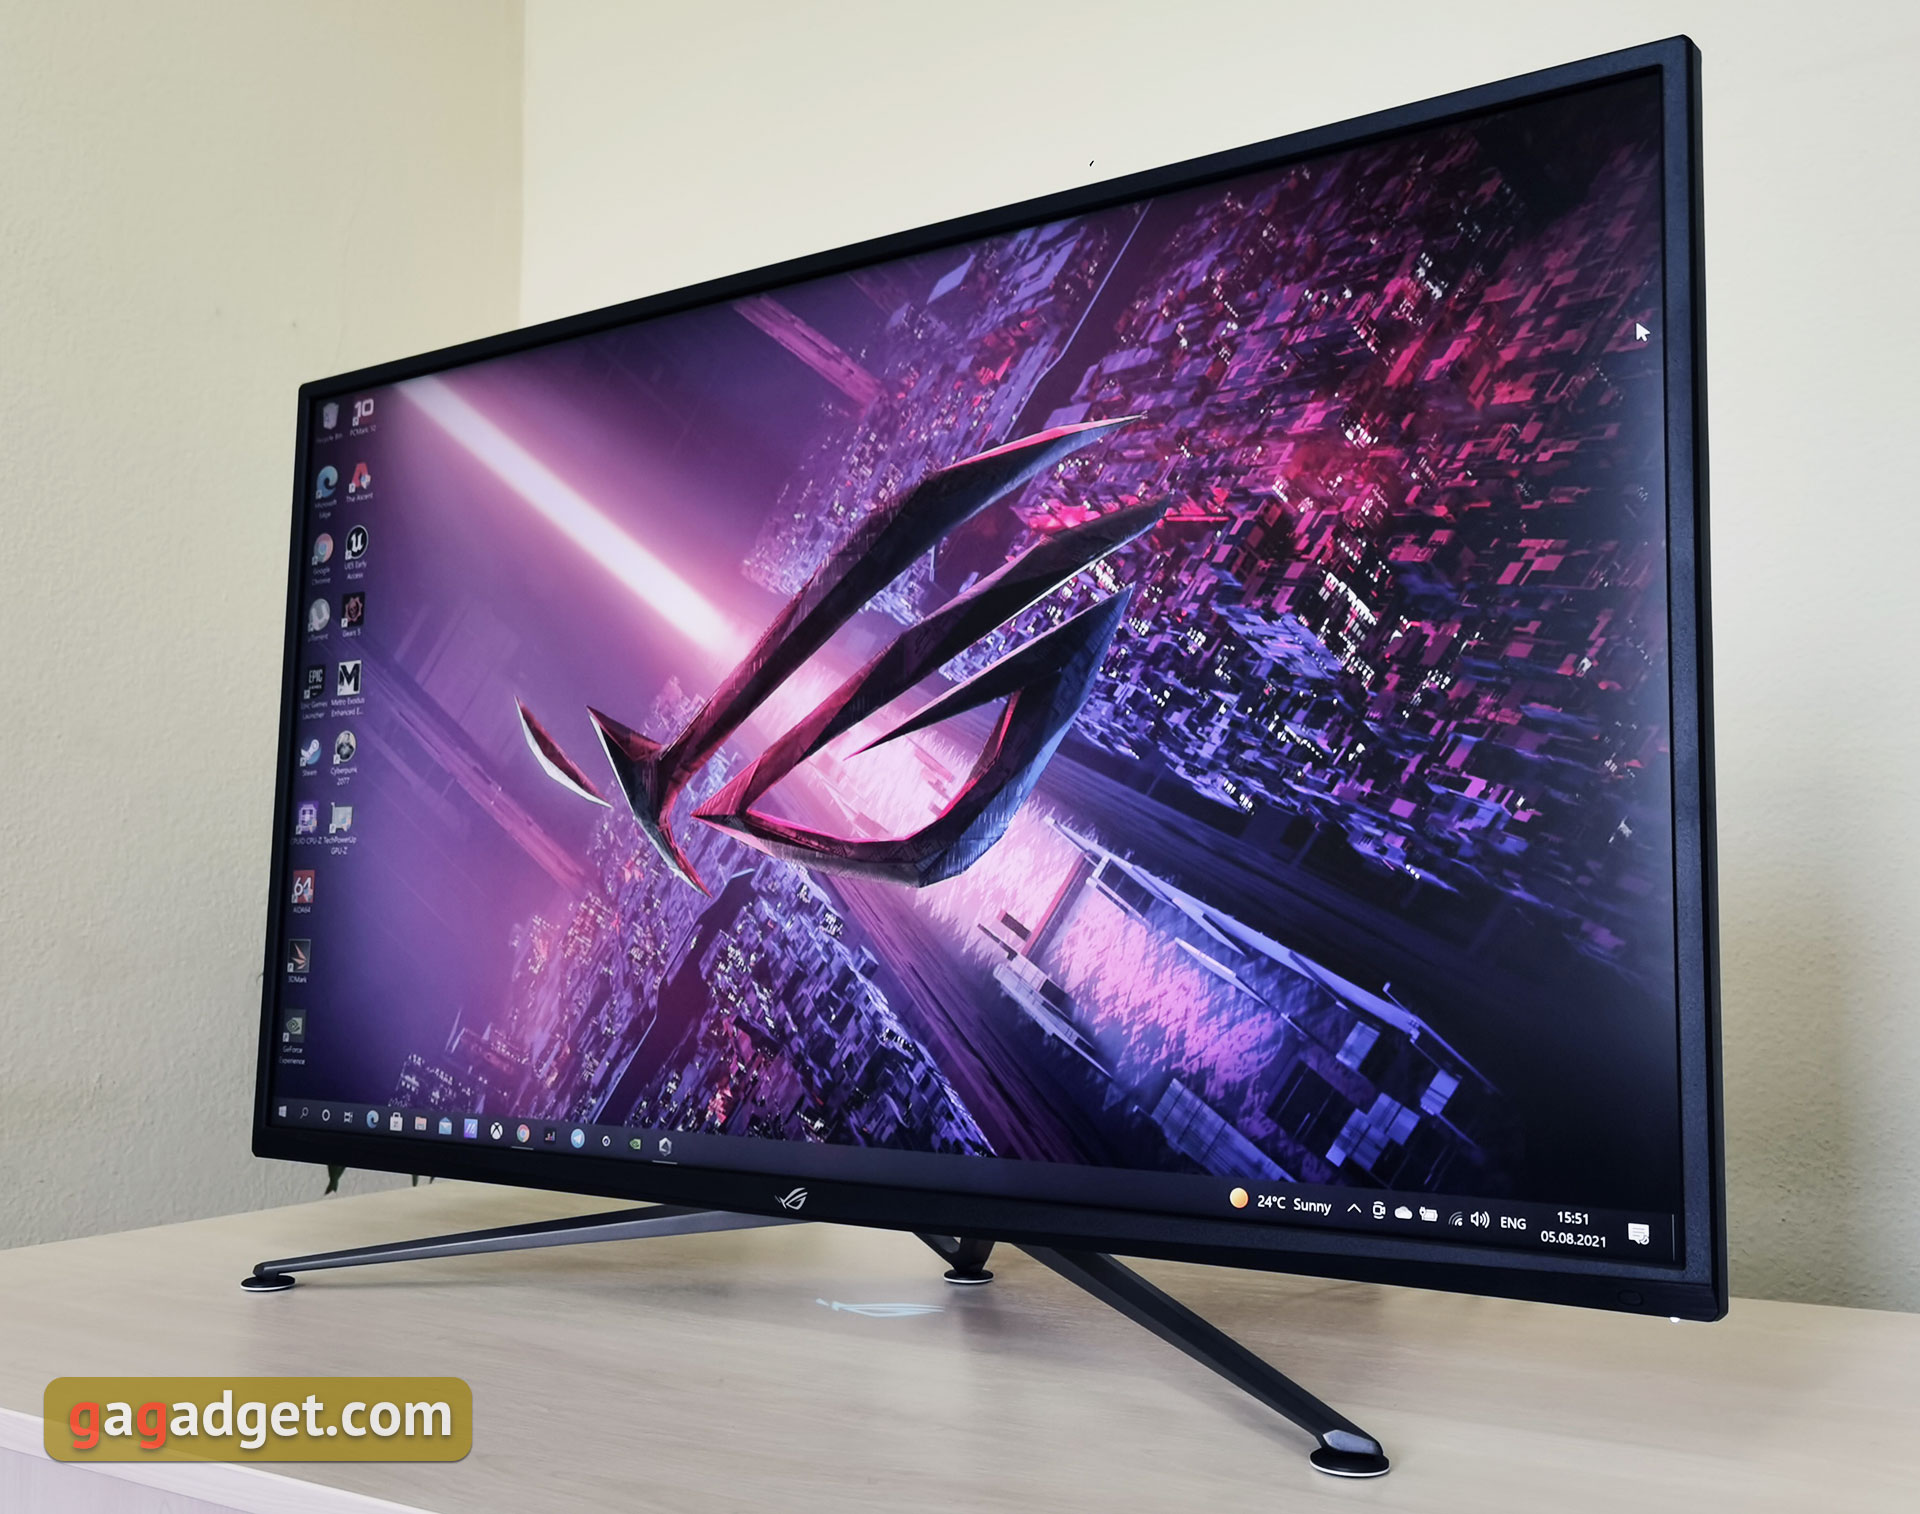 ASUS ROG Strix XG43UQ Overview: The Best Display for Next-Generation Gaming Consoles-3